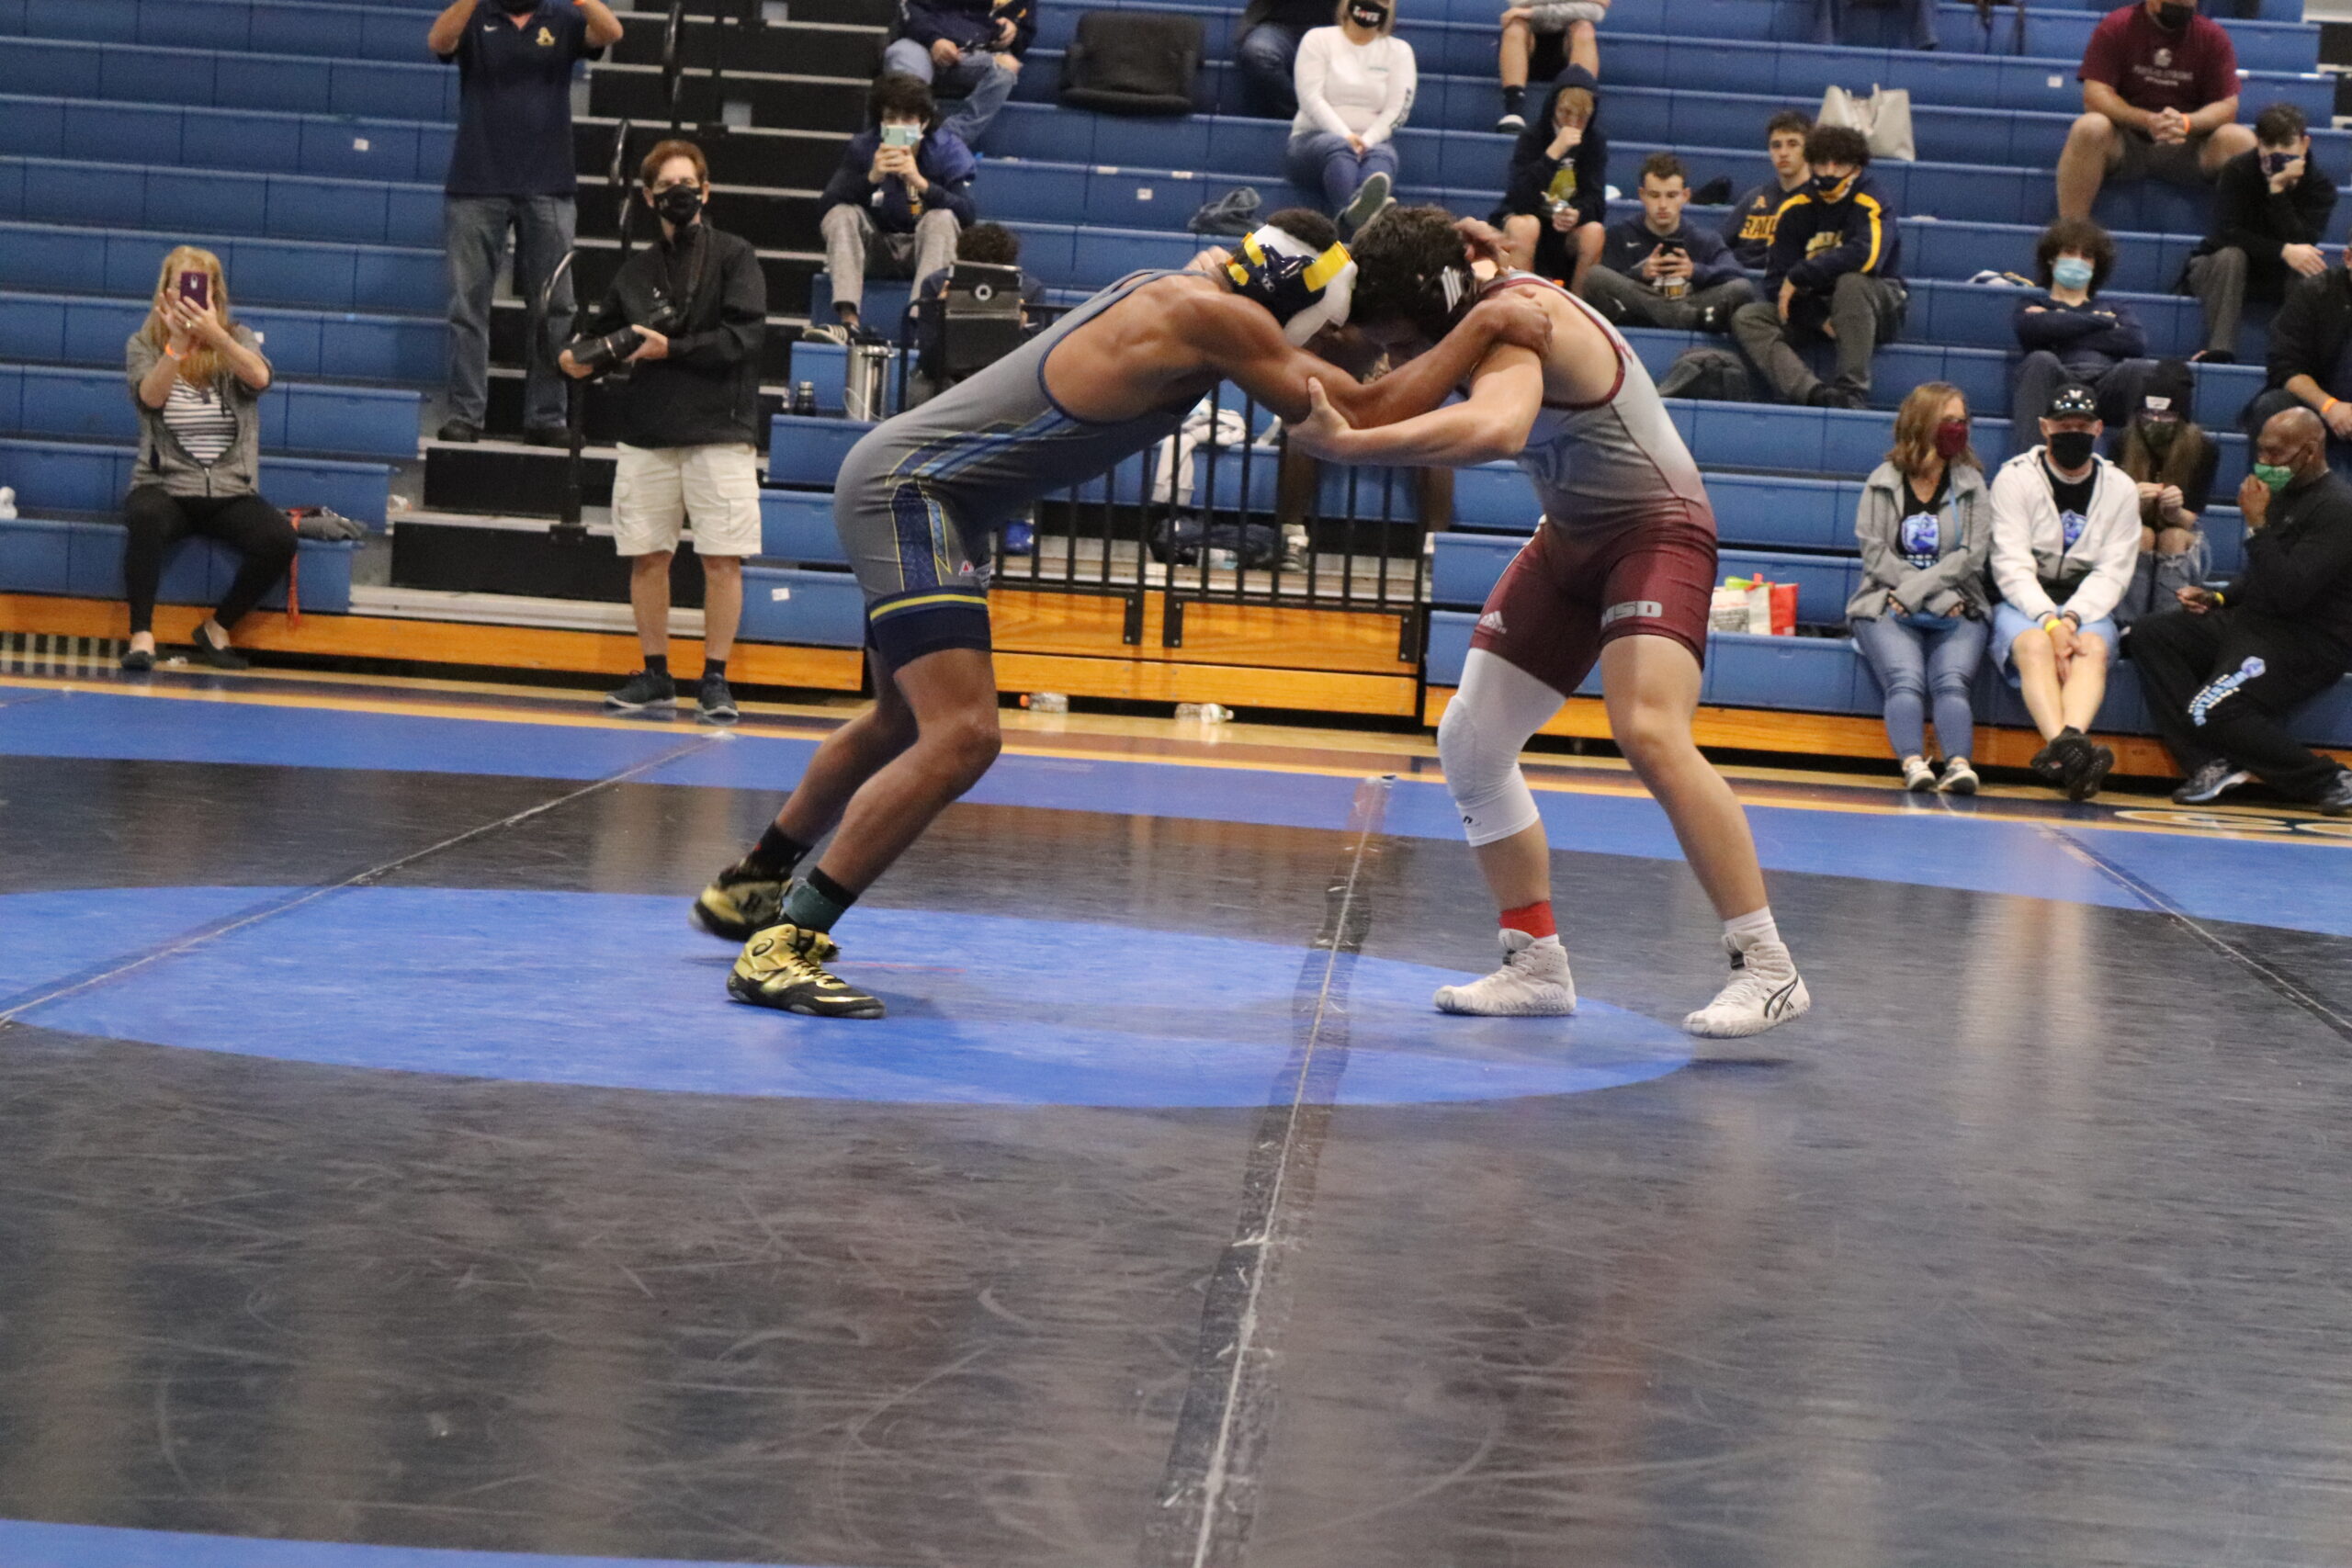 An MSD wrestler faces off an opponent in the BCAA tournament as spectators take pictures and videos. MSD took home a team award for the first time in more than a decade. Photo by Fenthon Aristhomene.